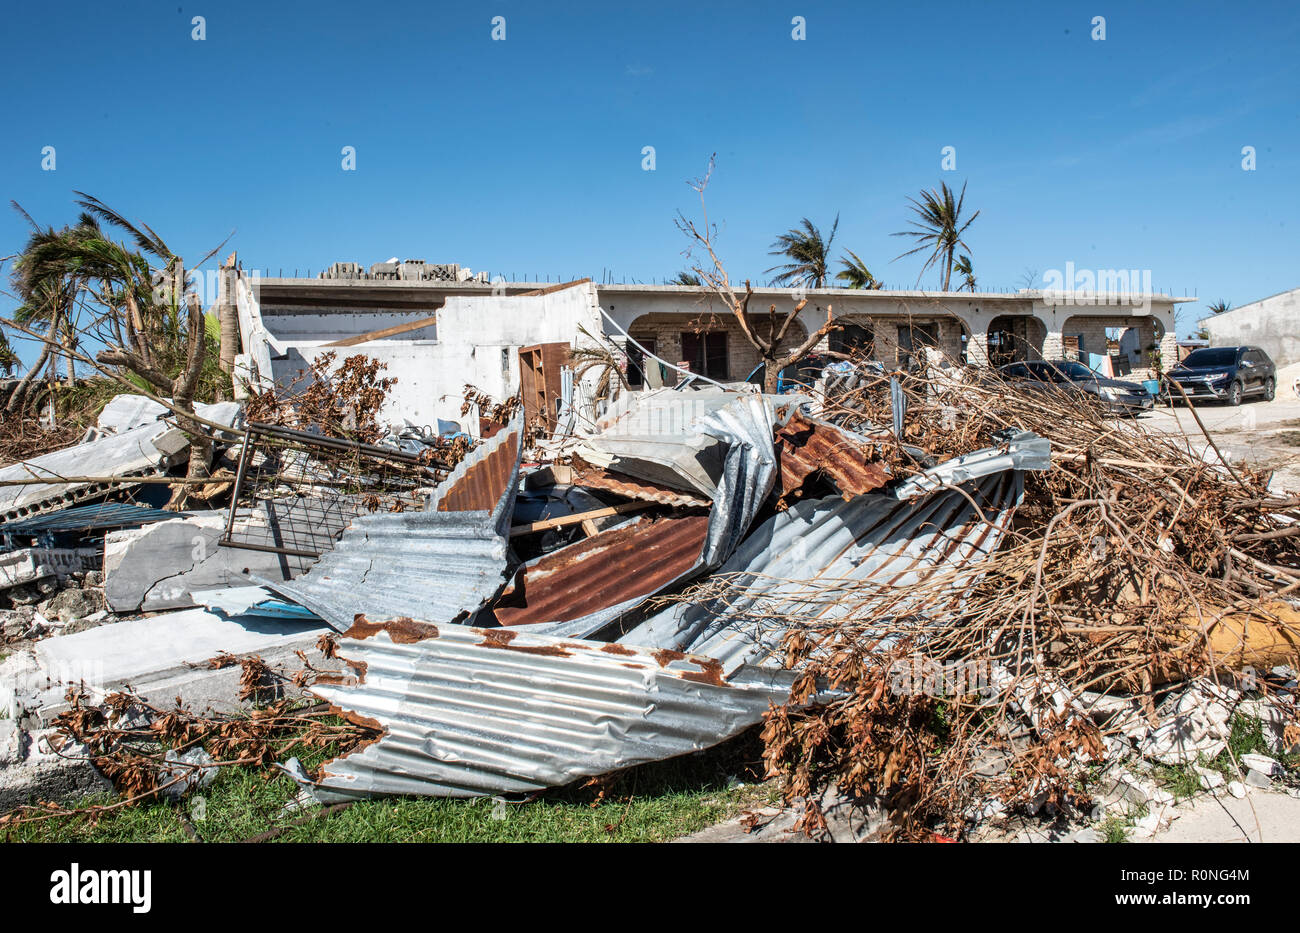 Homes nearly completely destroyed by Super Typhoon Yutu as emergency relief efforts begin November 3, 2018 in Saipan, Commonwealth of the Northern Mariana Islands. The islands were devastated by Typhoon Yutu on October 28th, the strongest typhoon to impact the Mariana Islands on record. Stock Photo